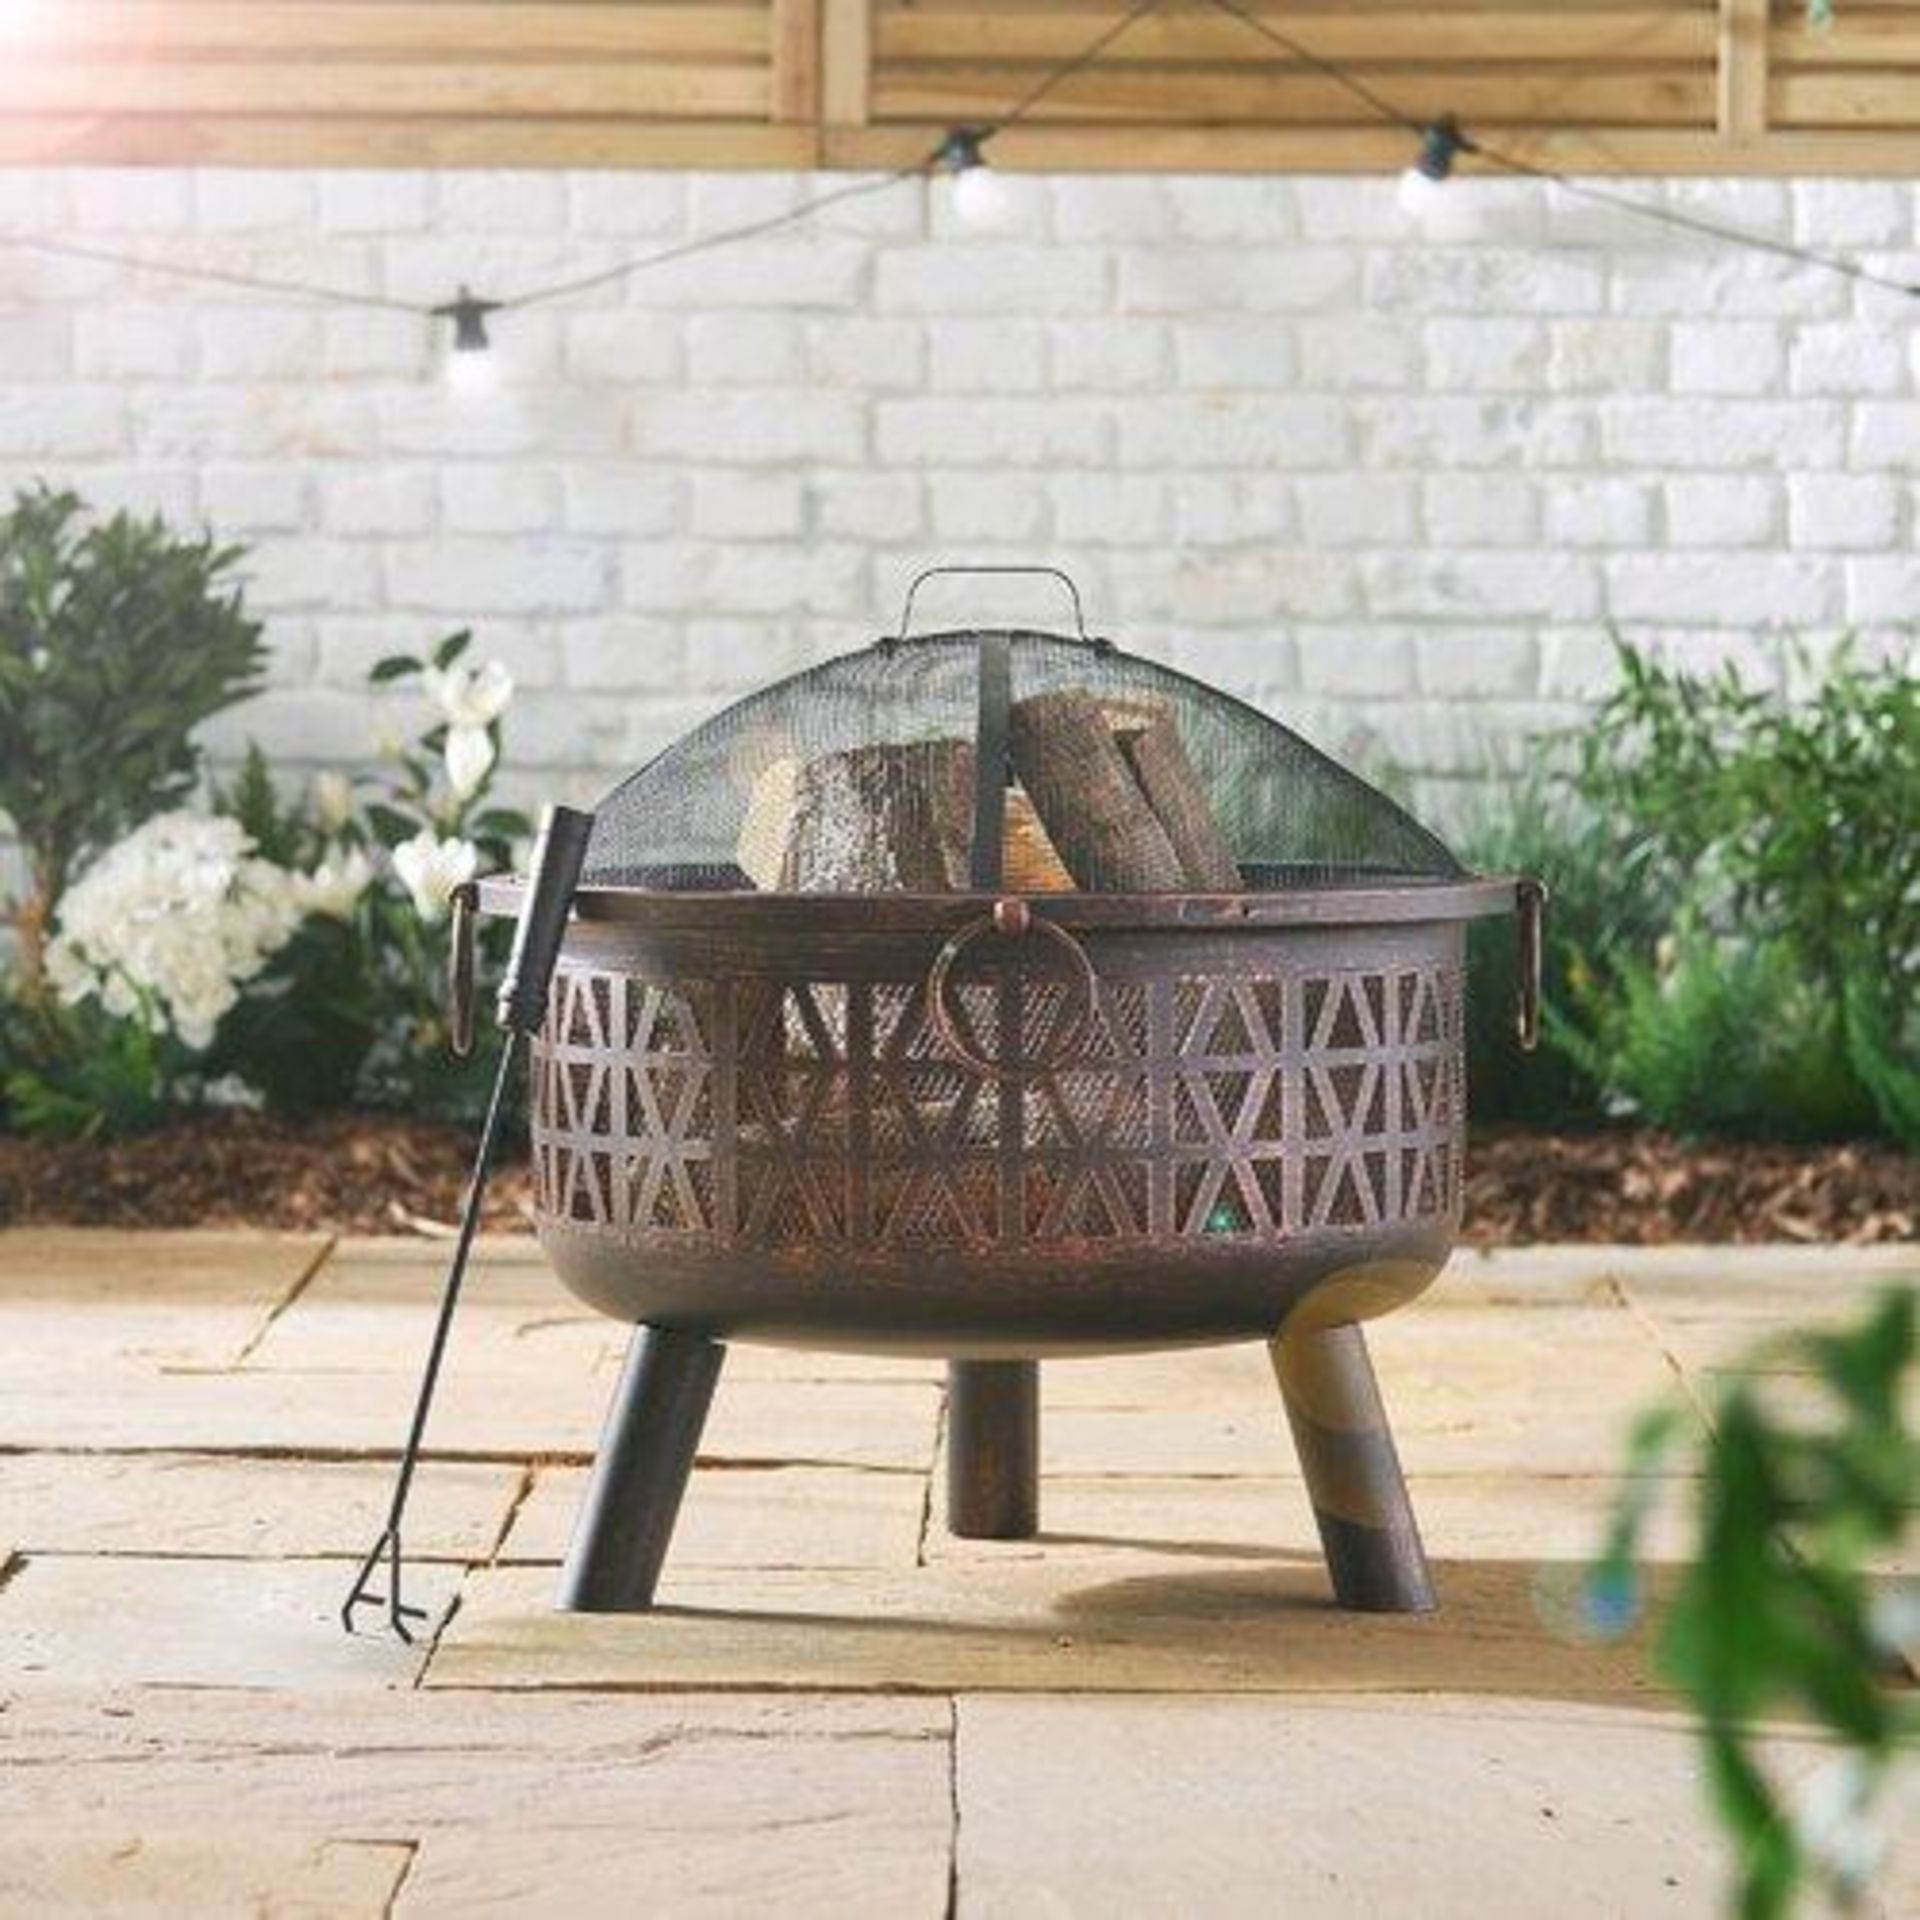 Geo Fire Pit - PW Geo Fire PitMake the most of your outdoor space with this geo fire pit â€“ the